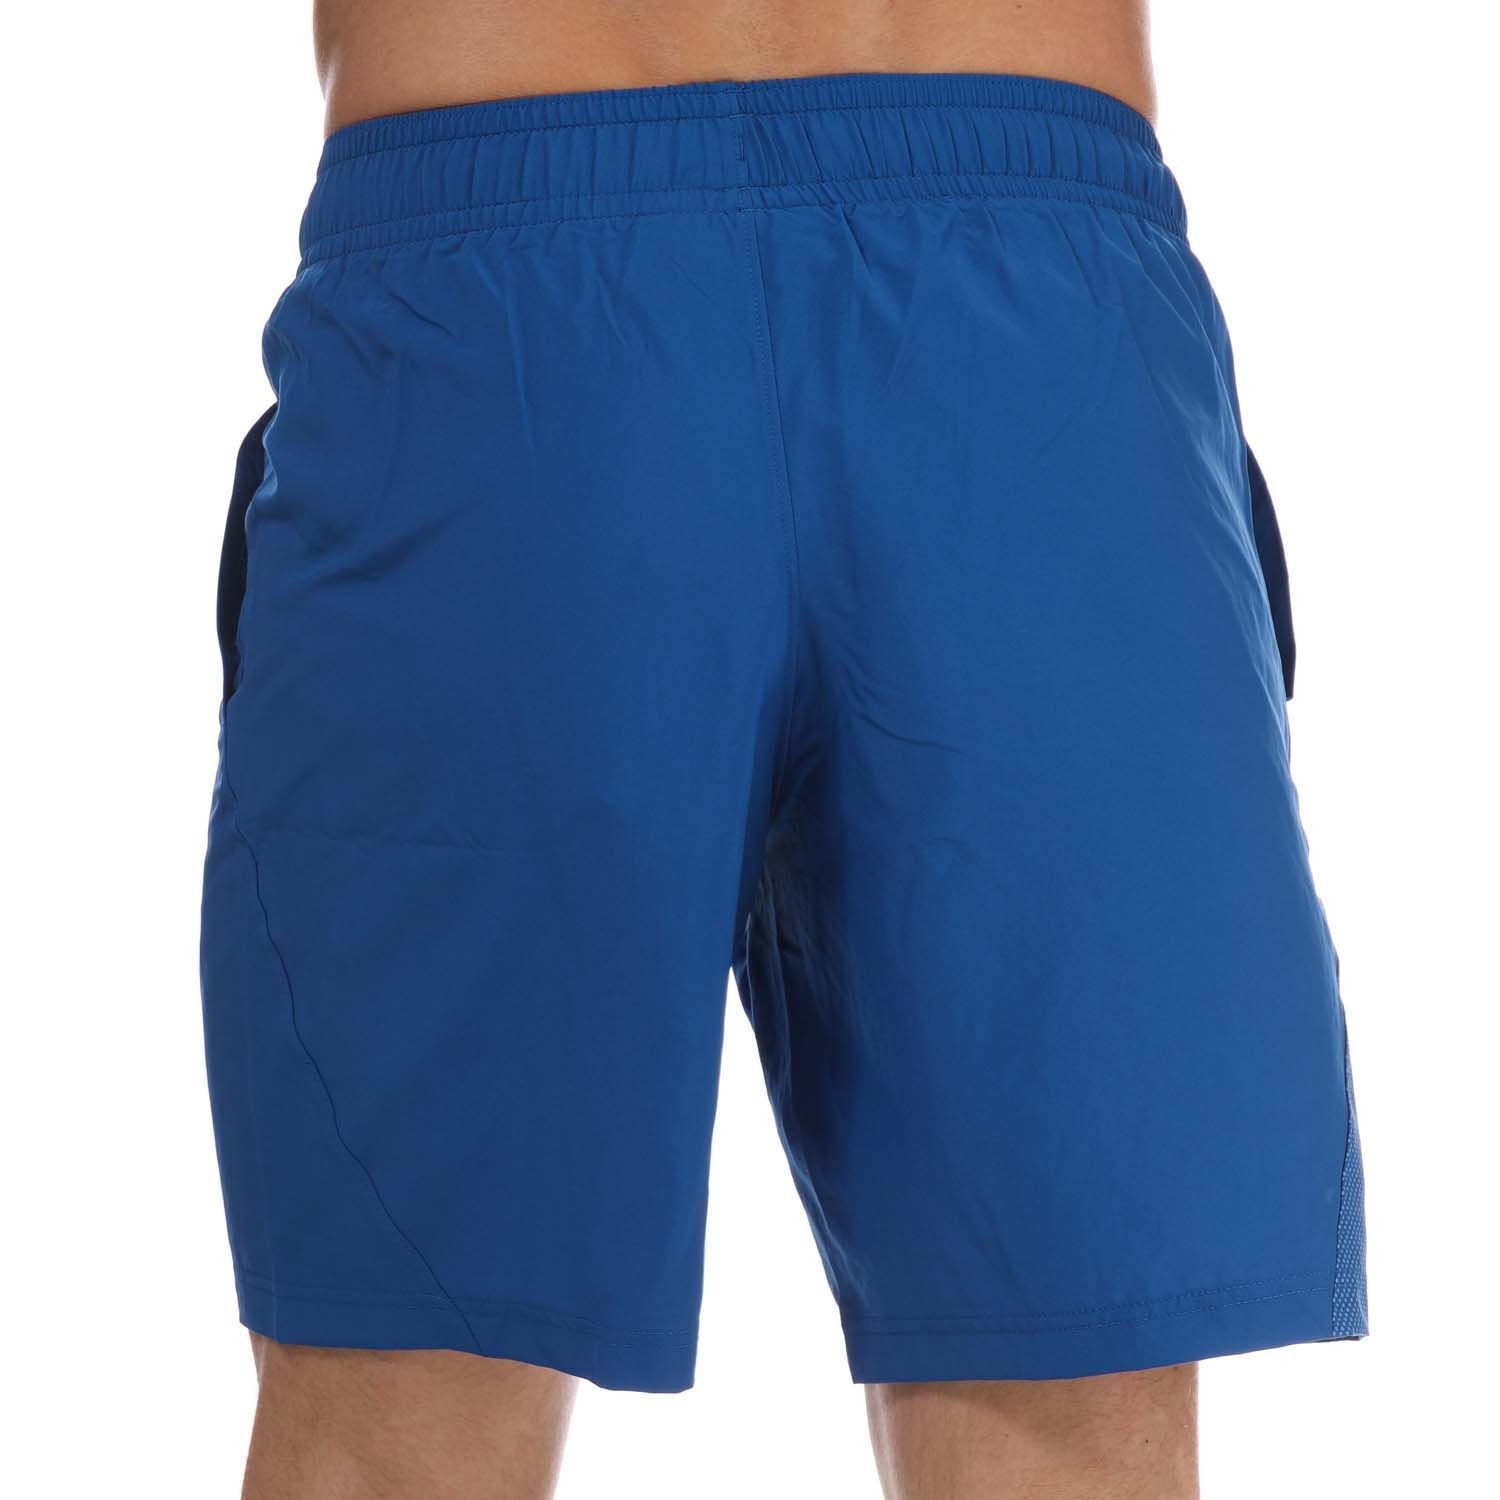 Mens Under Armour Woven Graphic Shorts in blue.- Encased elastic waistband with internal drawcord.- Open hand pockets.- Lightweight woven fabric delivers superior comfort & durability.- Main material: 100% Polyester.  Machine washable.- Ref: 1361434432